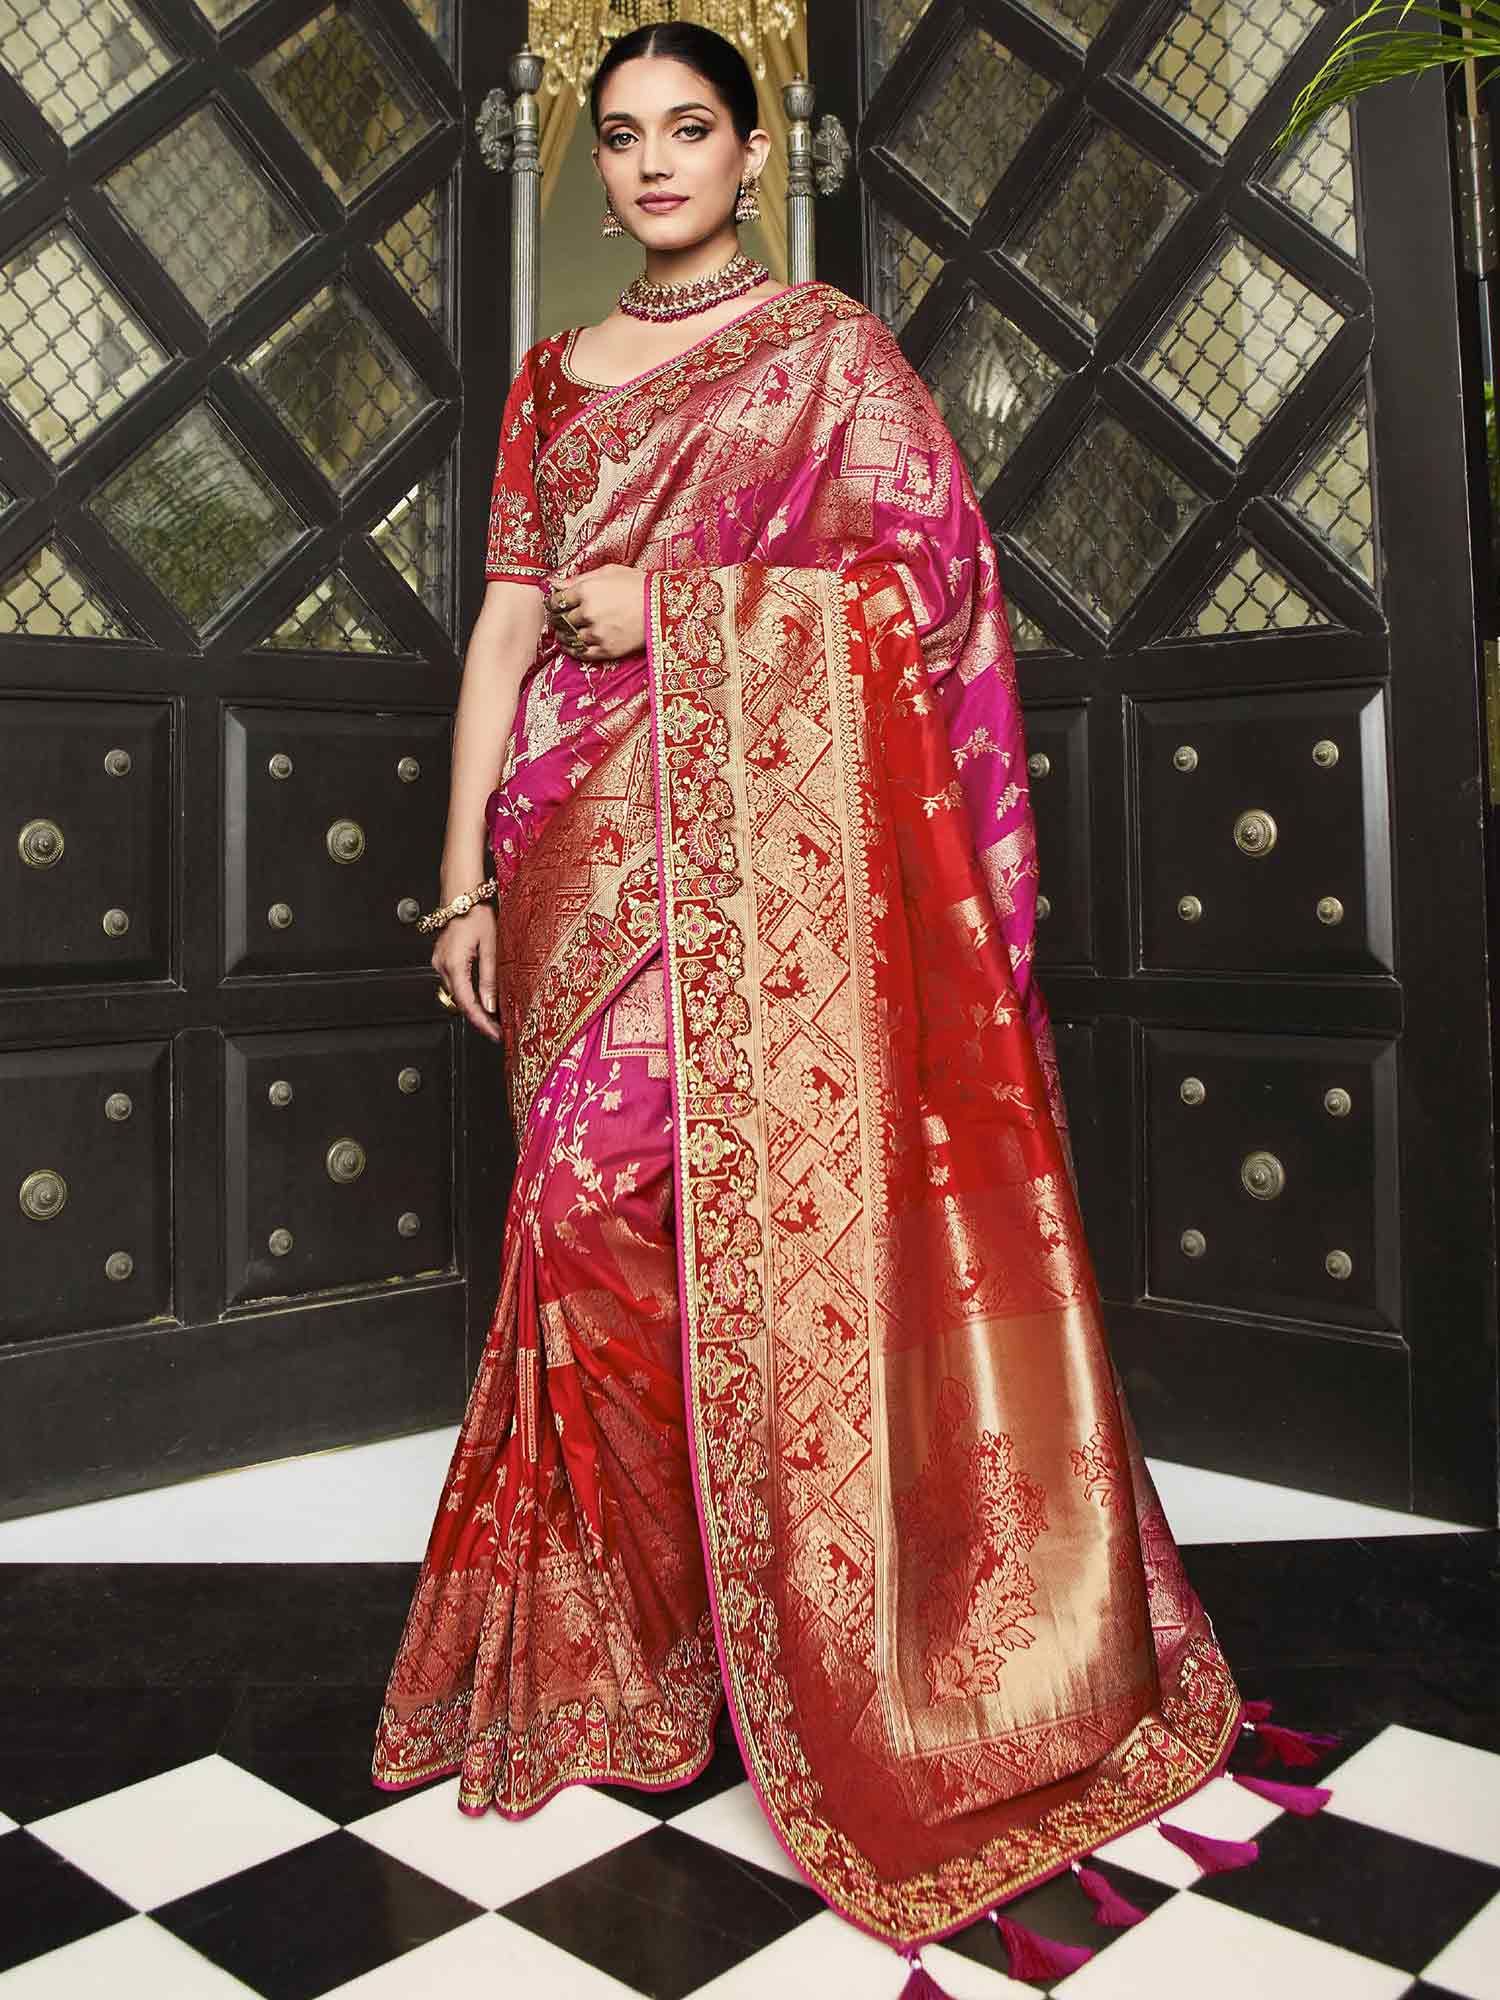 Blogs - How To Choose The Perfect Bridal Saree